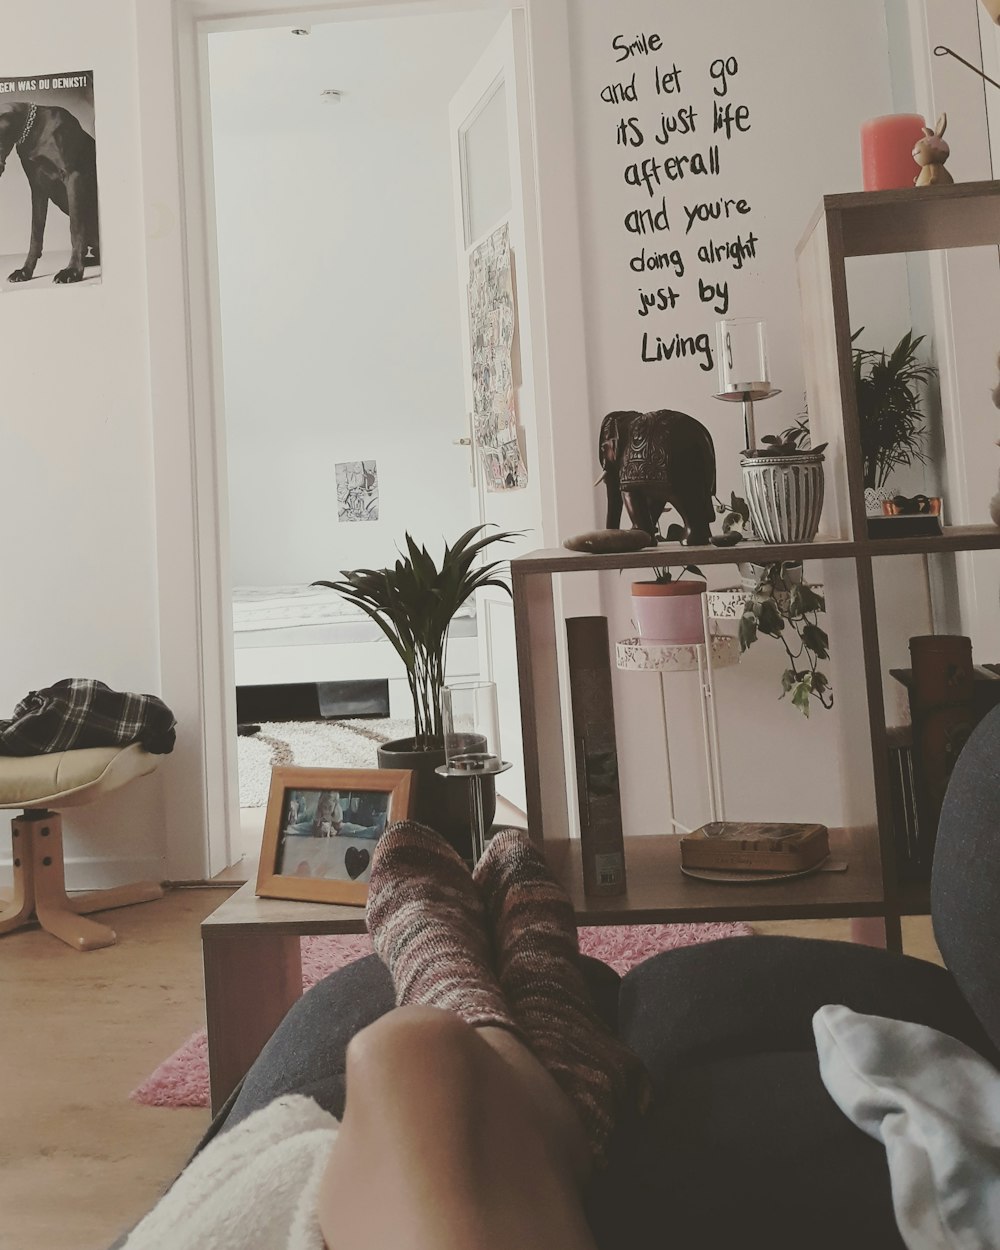 a person's feet resting on a couch in a living room